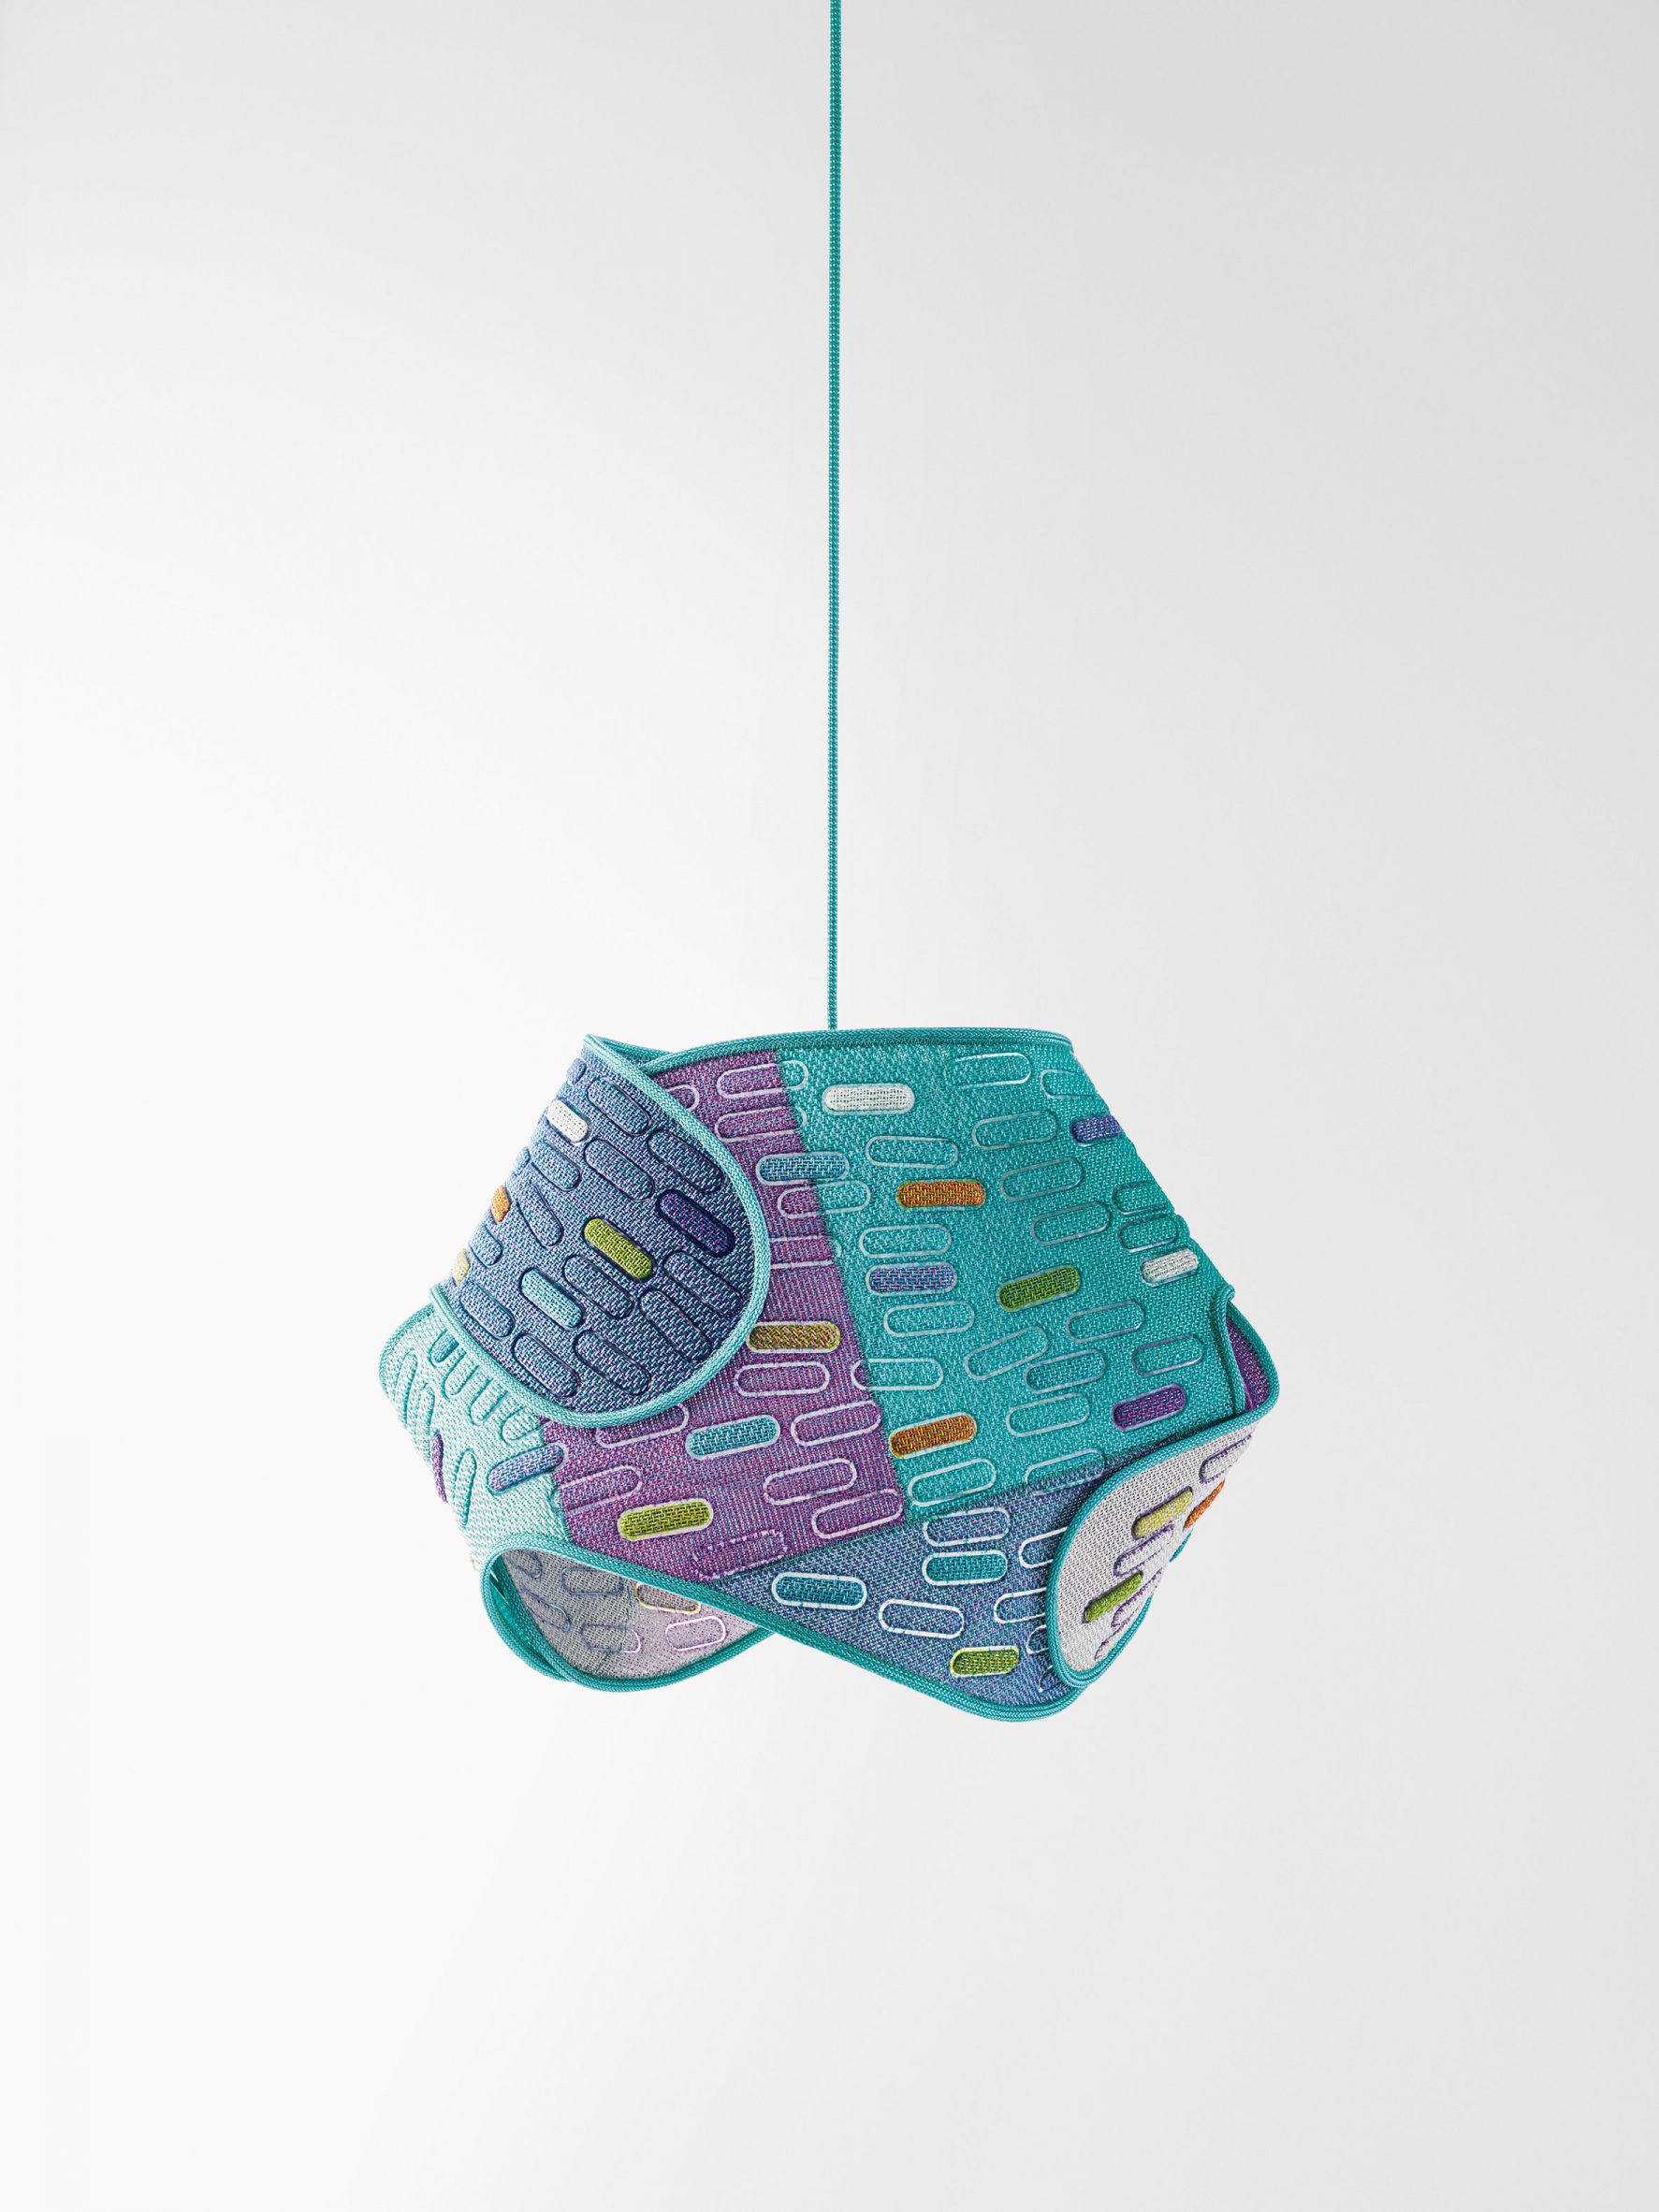 Blue lamp made from fabric offcuts